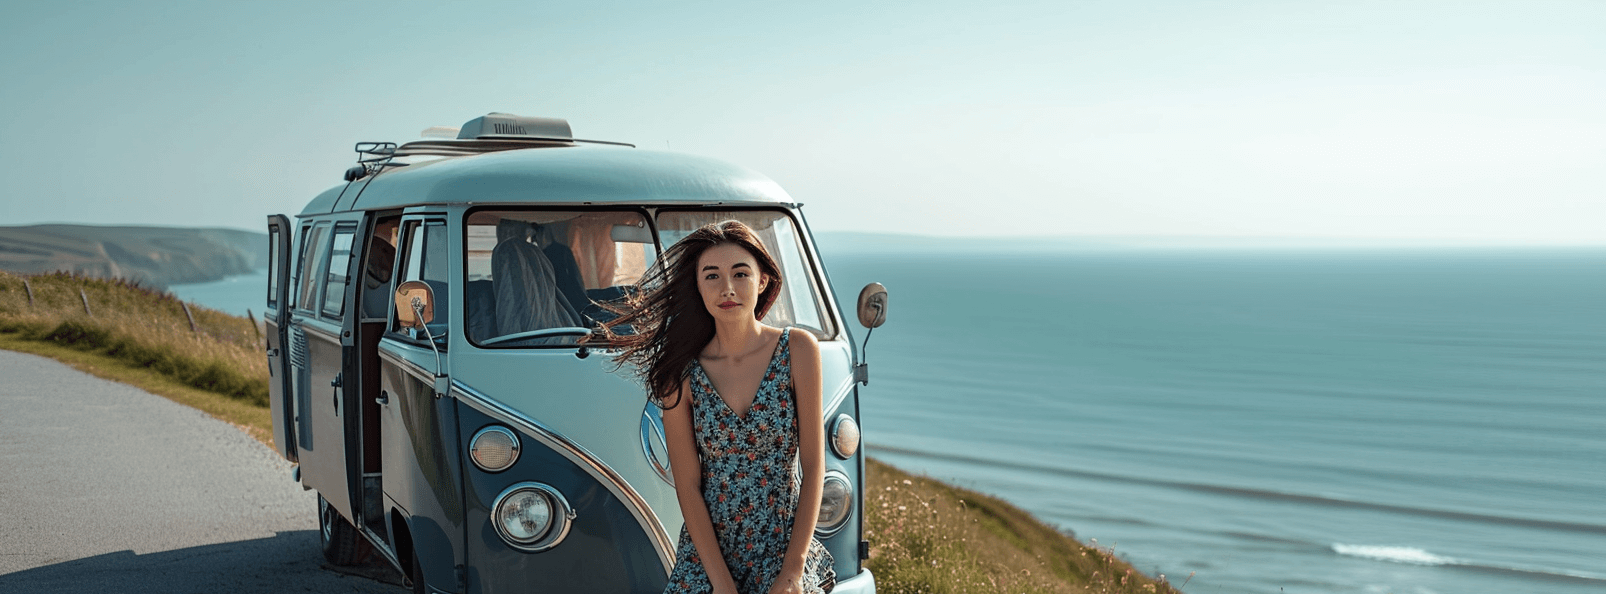 Emily-case-study-image-she-compared-campervan-insurance-and-got-a-better-deal